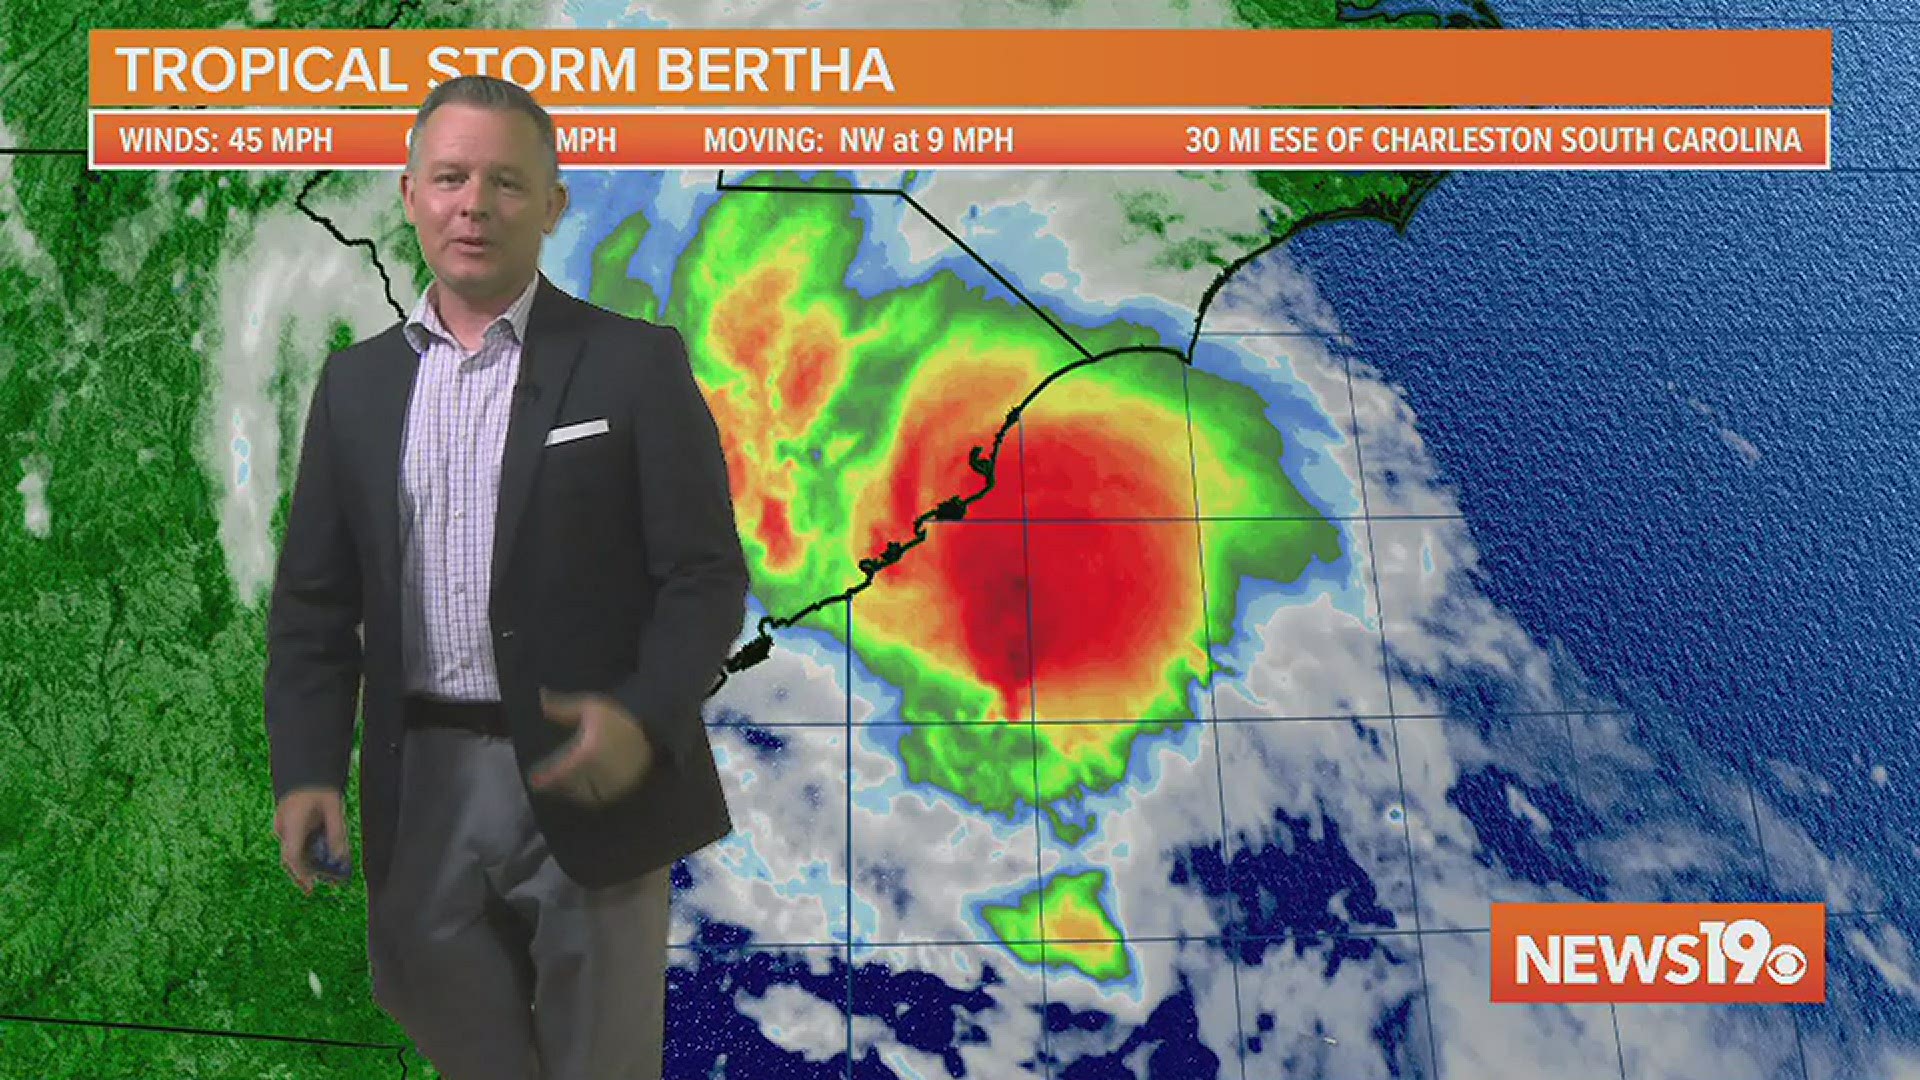 Tropical Storm Bertha does not really change our forecast though. We are expecting lots of rain, especially in the eastern Midlands.